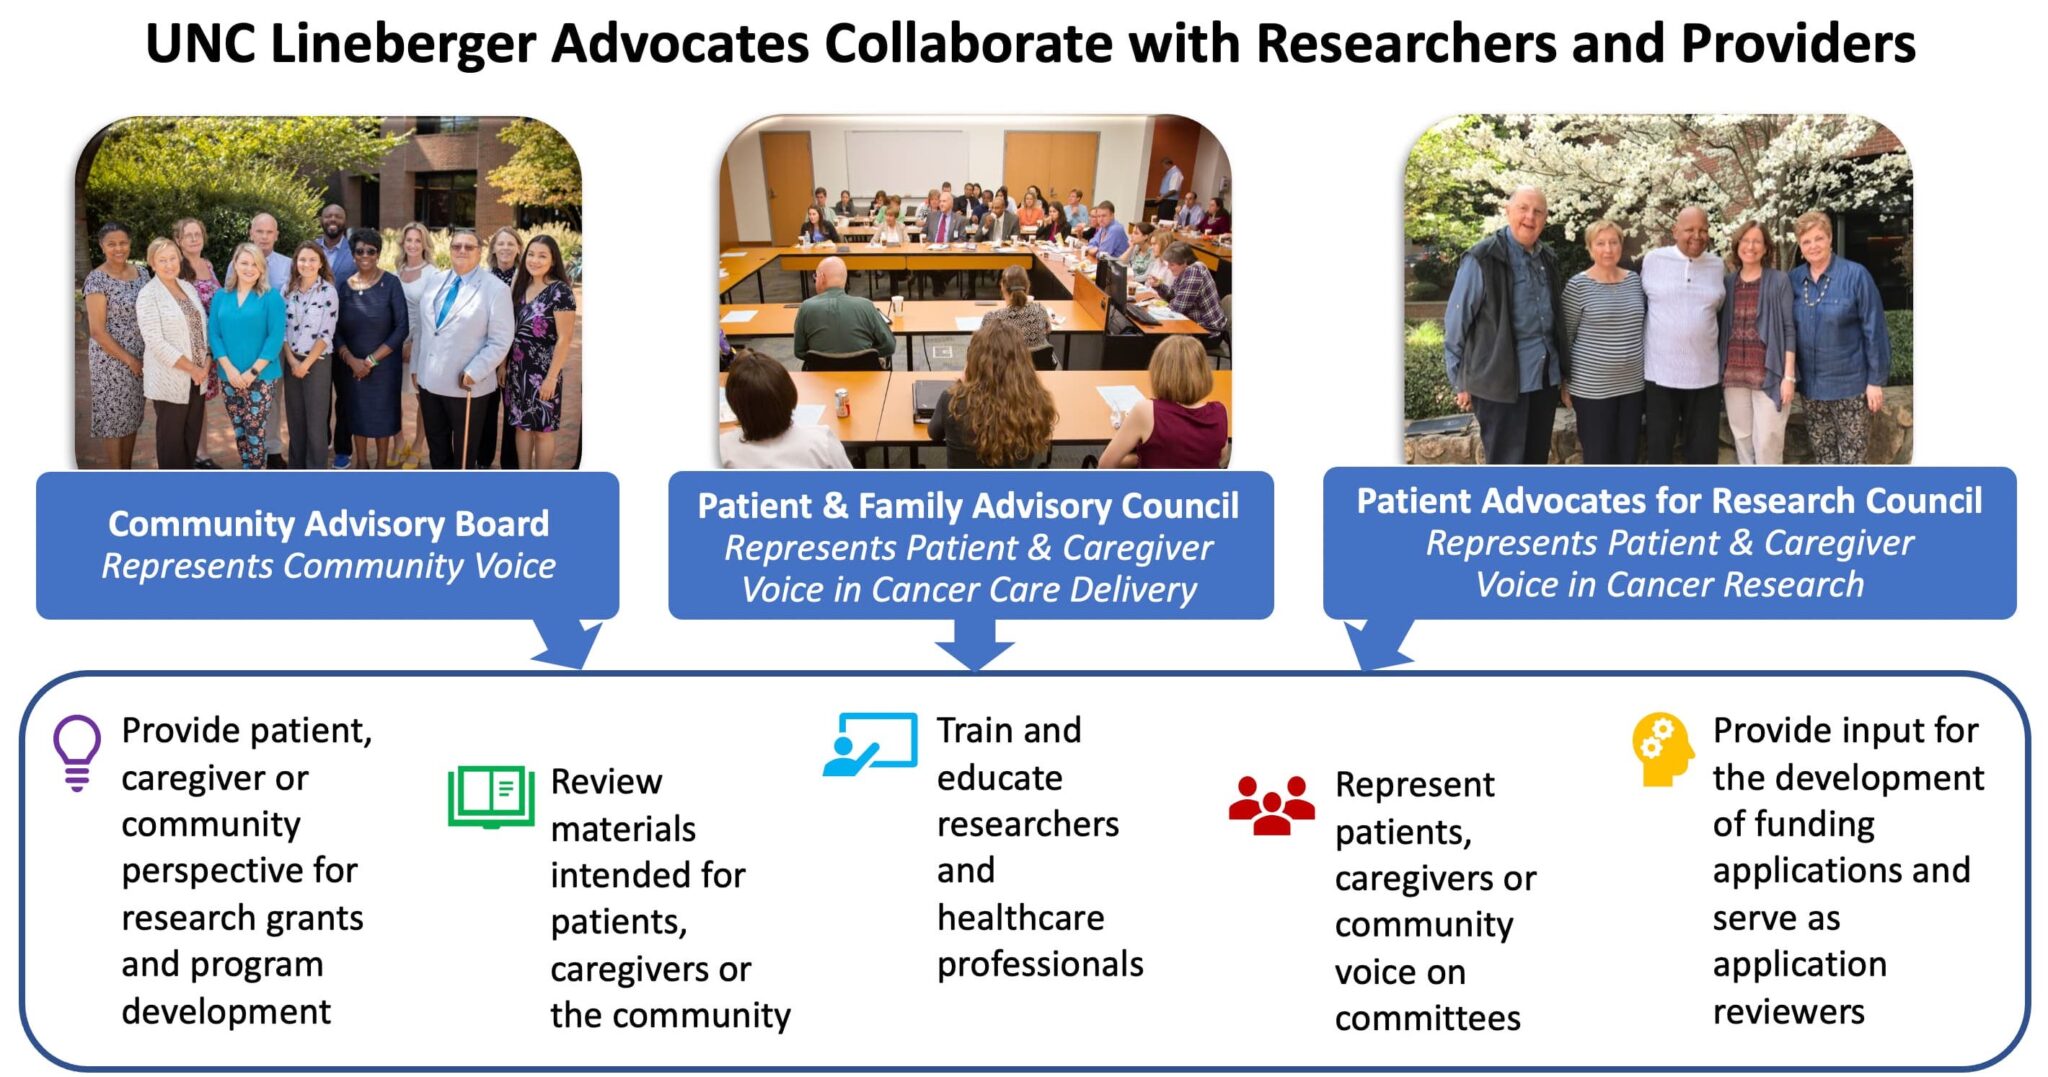 UNC Lineberger Advocates Collaborate with Researchers and Providers. Community Advisory Board Represents Community Voice. Patient and Family Advisory Council Represents patient and caregiver voice in cancer care delivery. Patient advocates for Research Council represents patient and caregiver voice in cancer research. Providing patient, caregiver, and community perspective, review materials, train and educate, and provide input for funding applications.